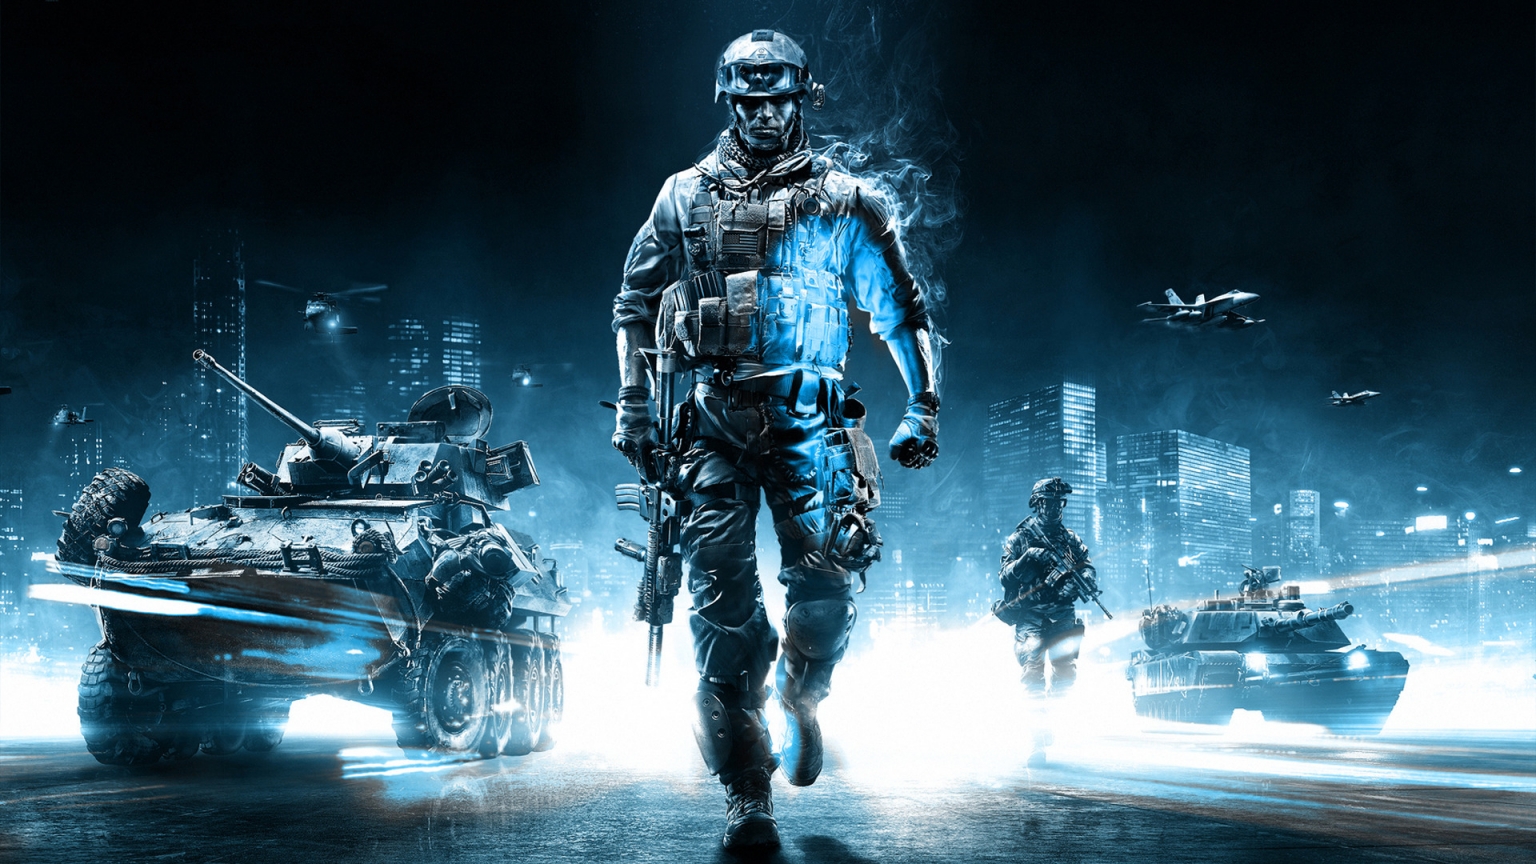 Battlefield 3 Action Game for 1536 x 864 HDTV resolution